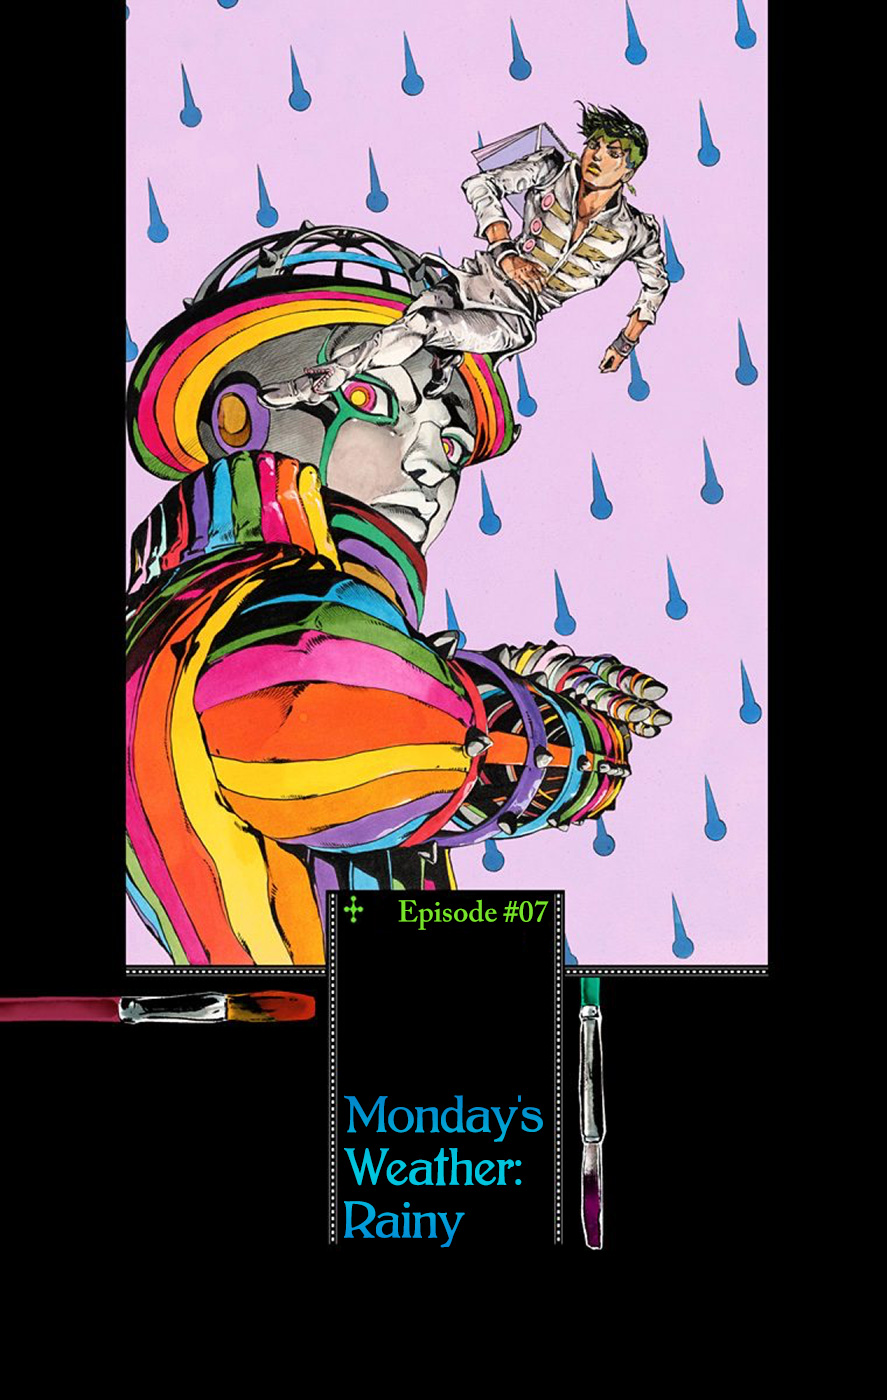 Thus Spoke Kishibe Rohan [Official Colored] Vol.2 Chapter 7: Episode #07 - Monday's Weather: Rainy - Picture 1